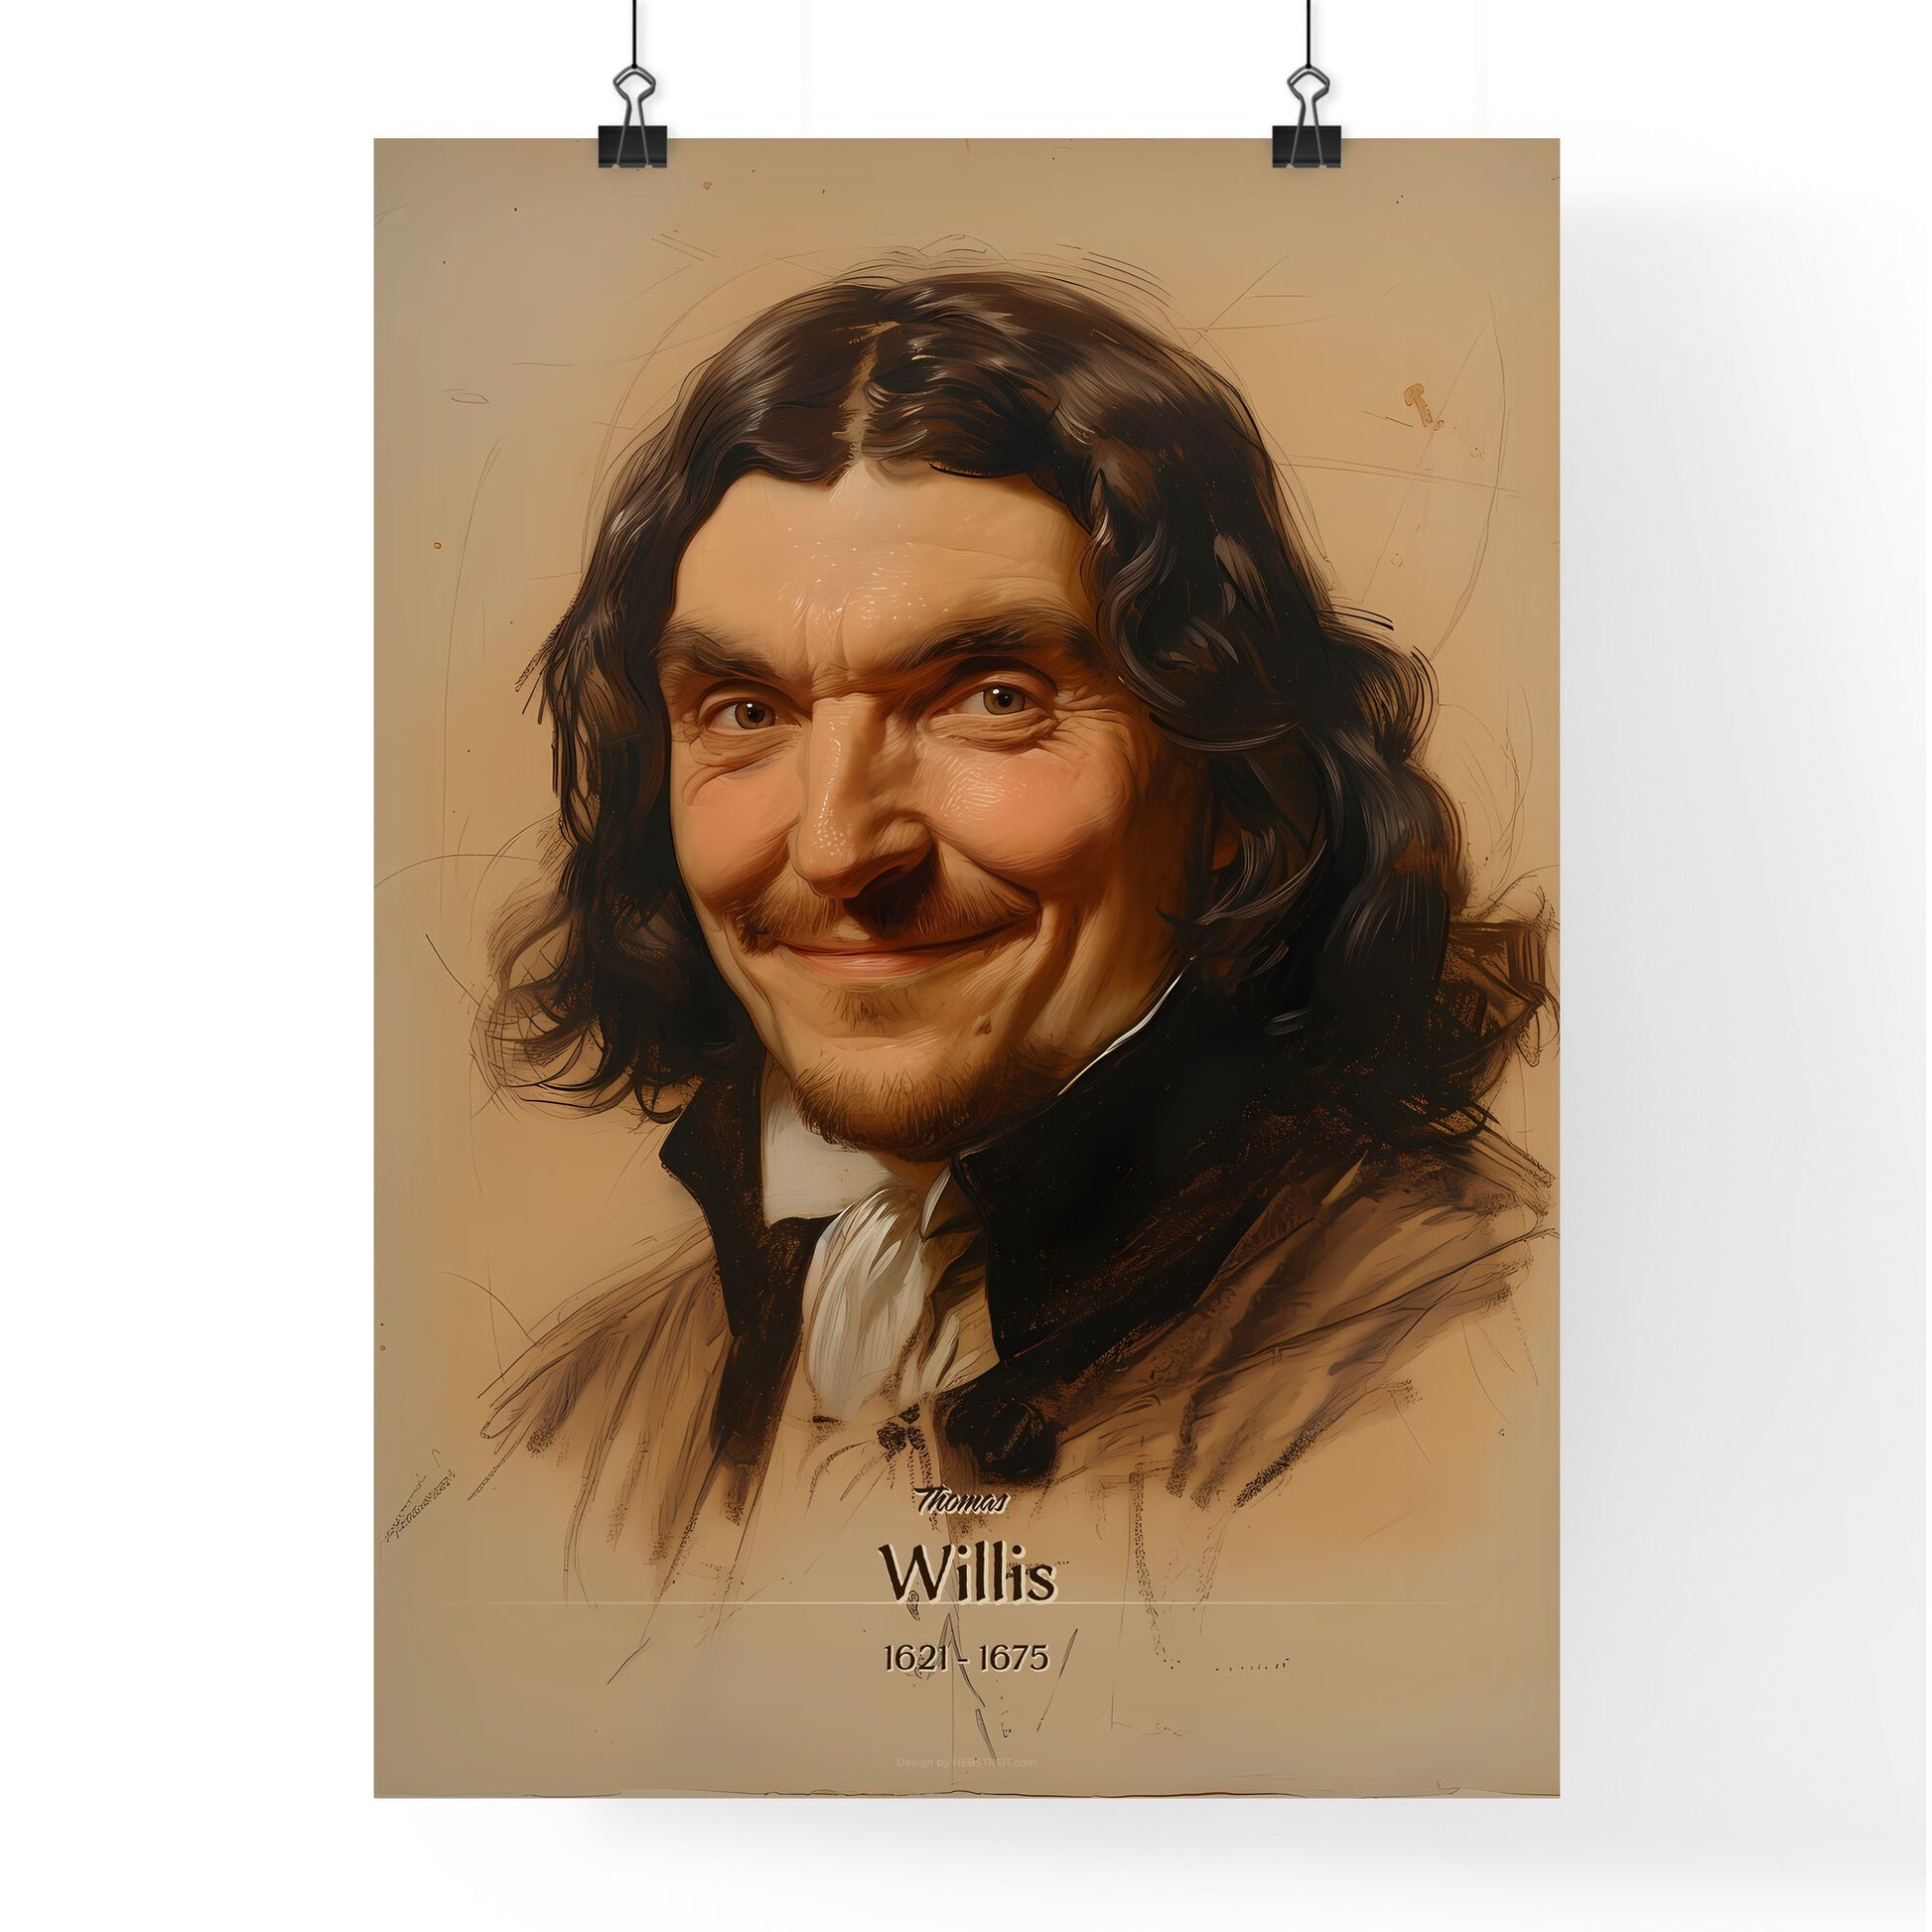 Thomas, Willis, 1621 - 1675, A Poster of a man with long hair smiling Default Title